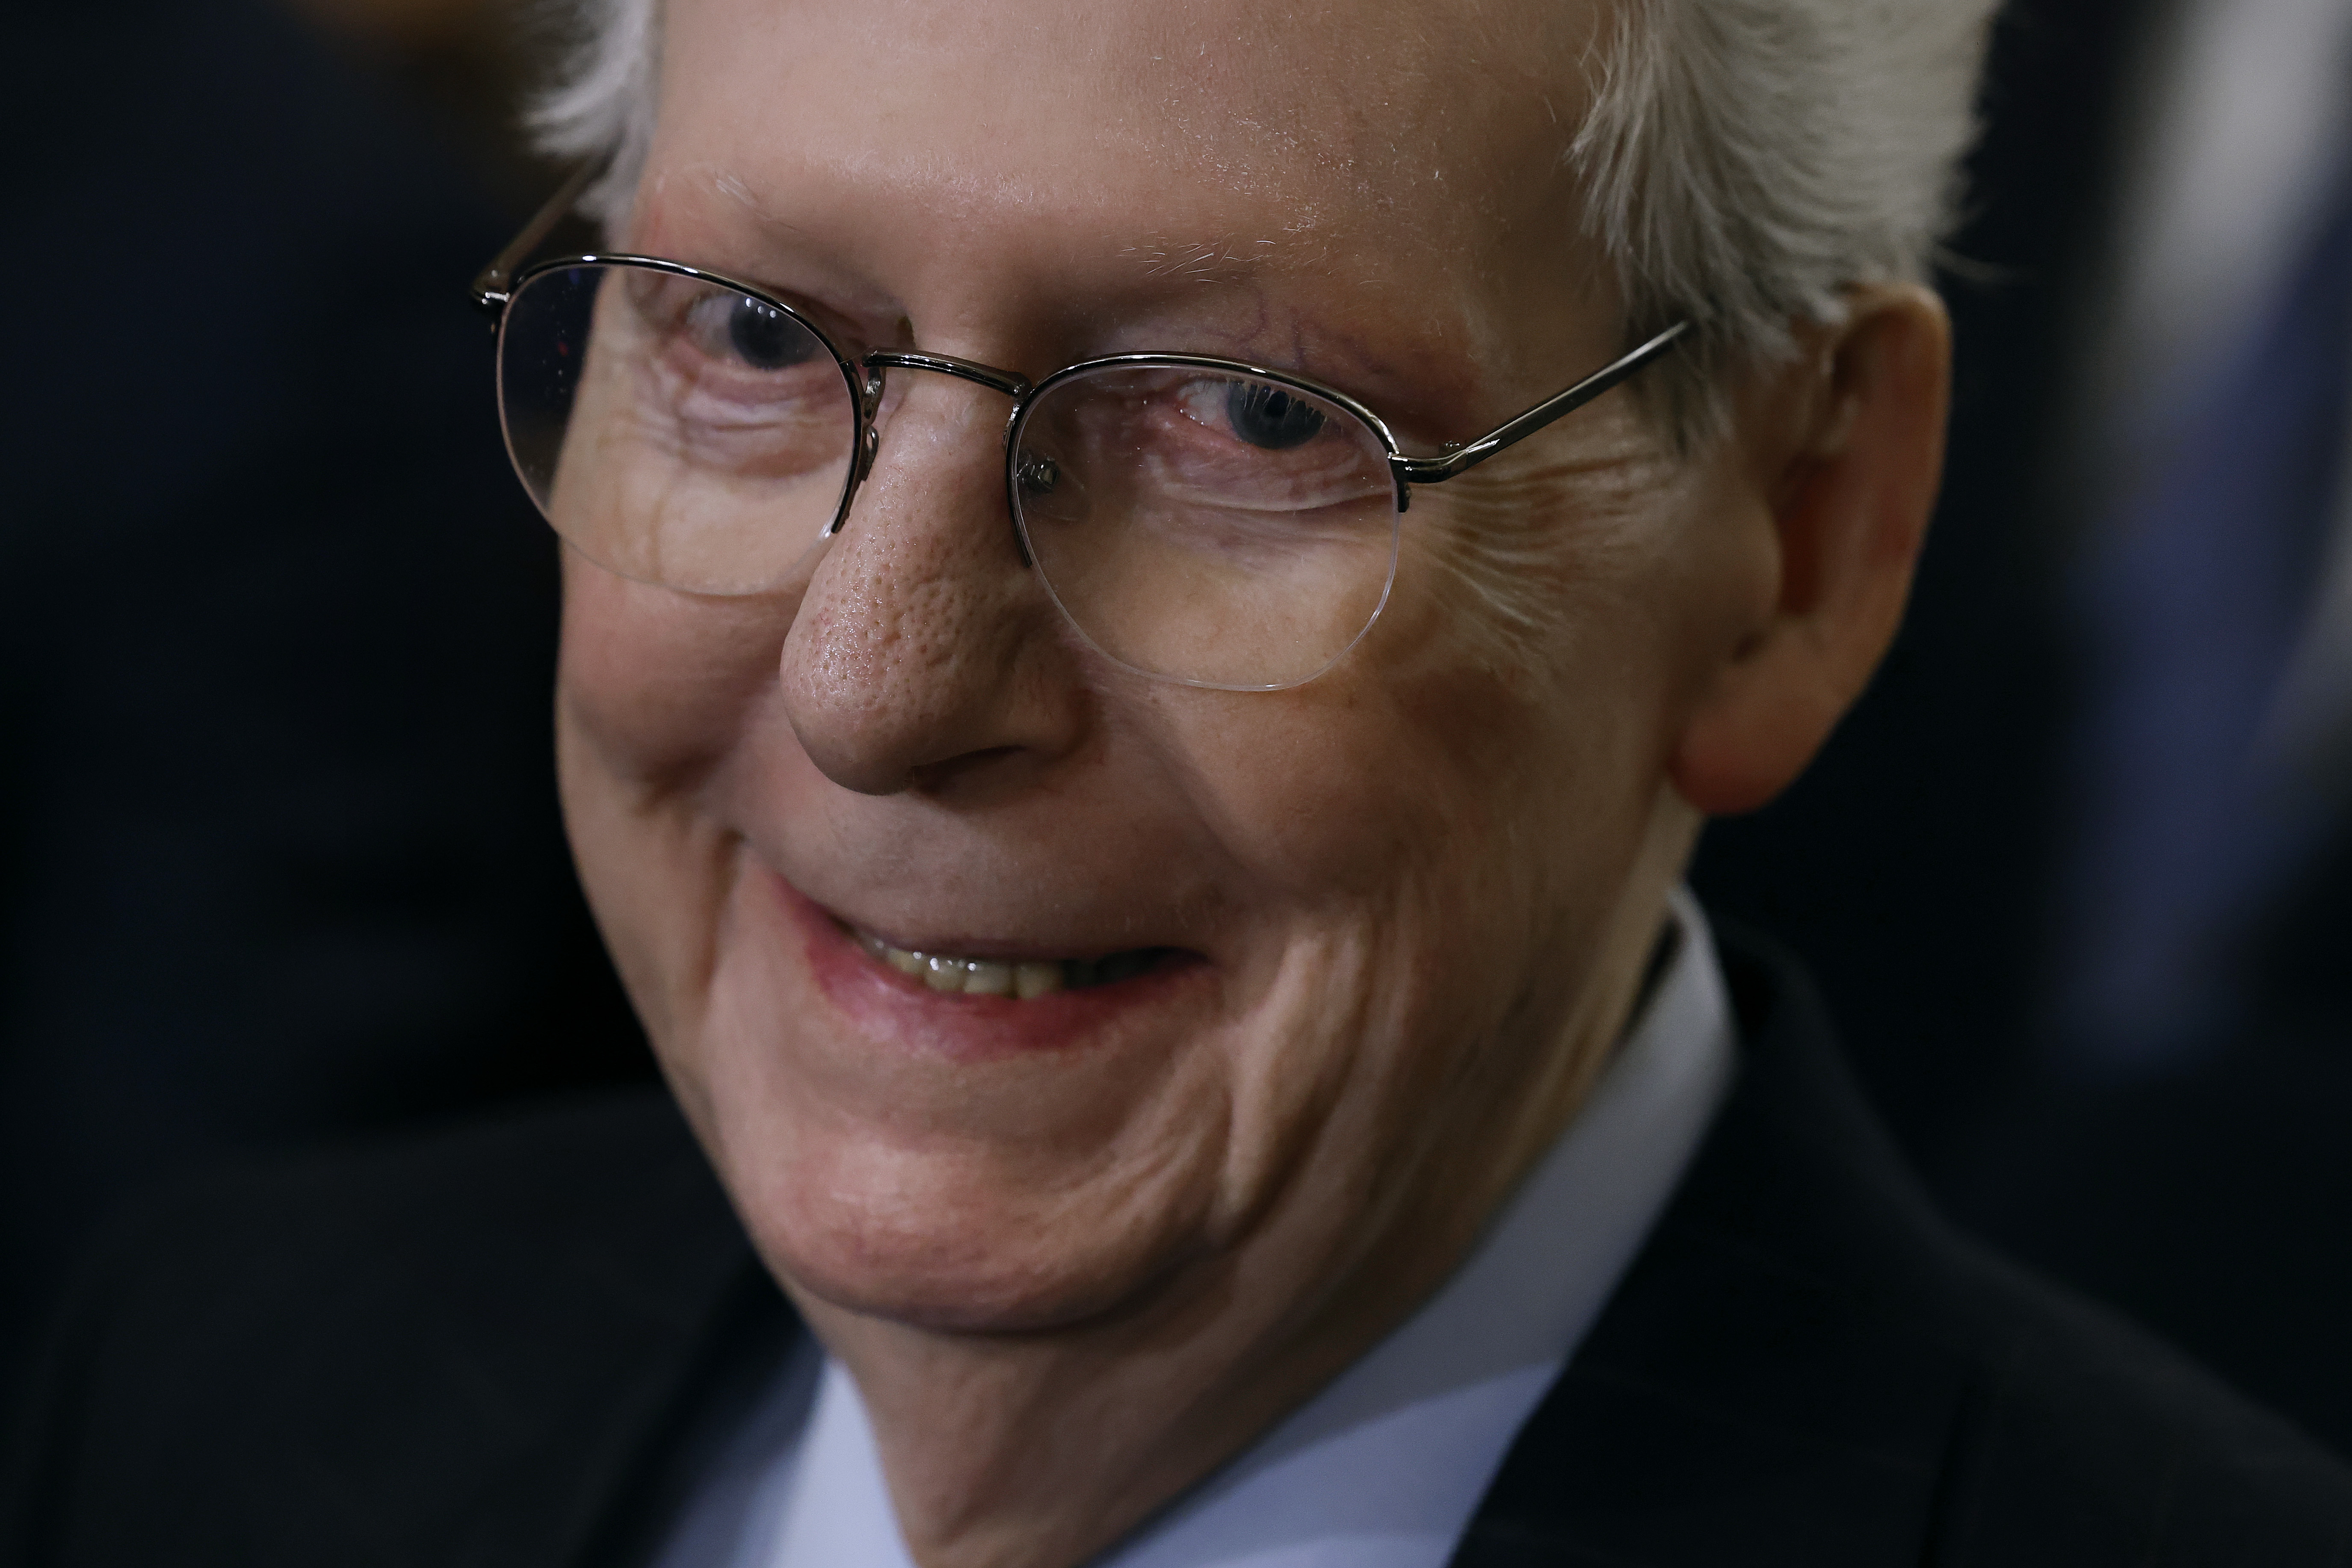 McConnell stepping down from Senate leadership position